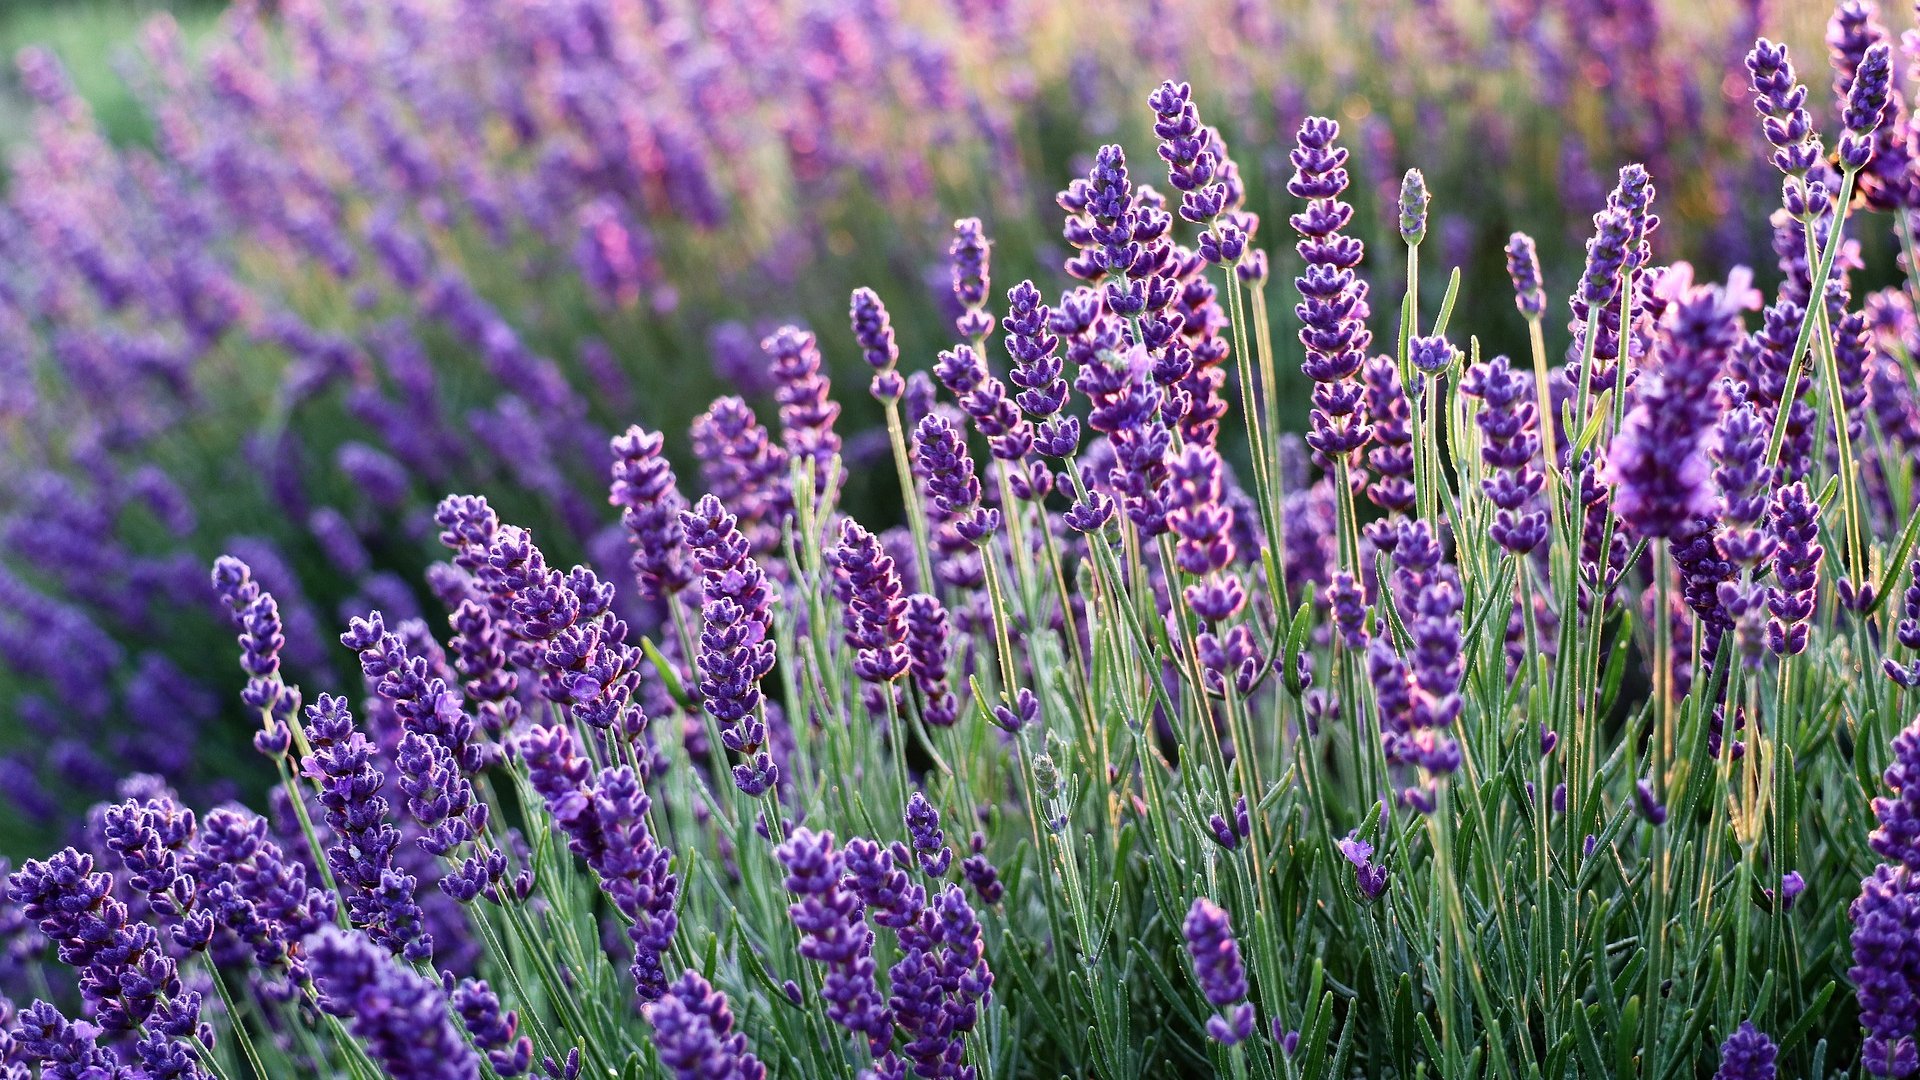 Along the itinerary we will meet lavender crops and discover a diversity of vegetation typical of the Colline Pisane